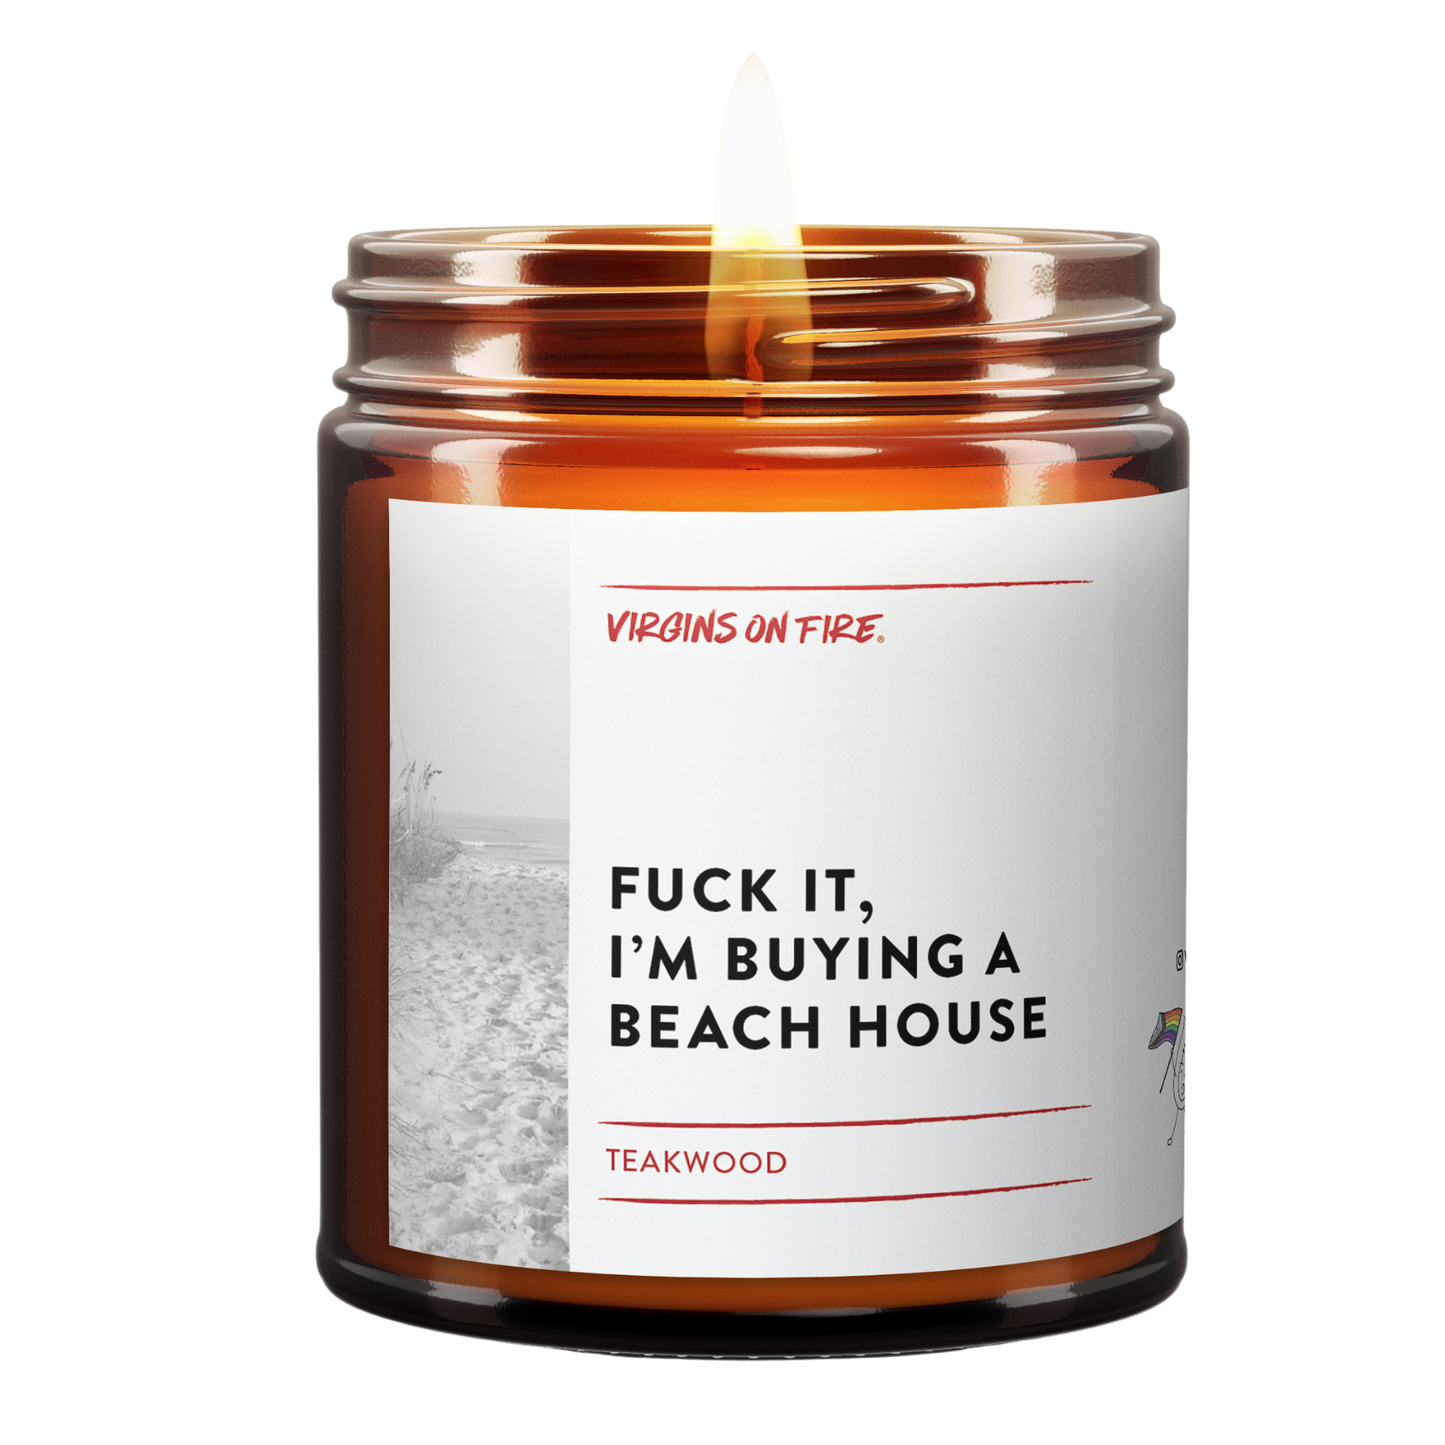 FUCK IT, I'M BUYING A BEACH HOUSE (Teakwood) ☀️ Soy Candle